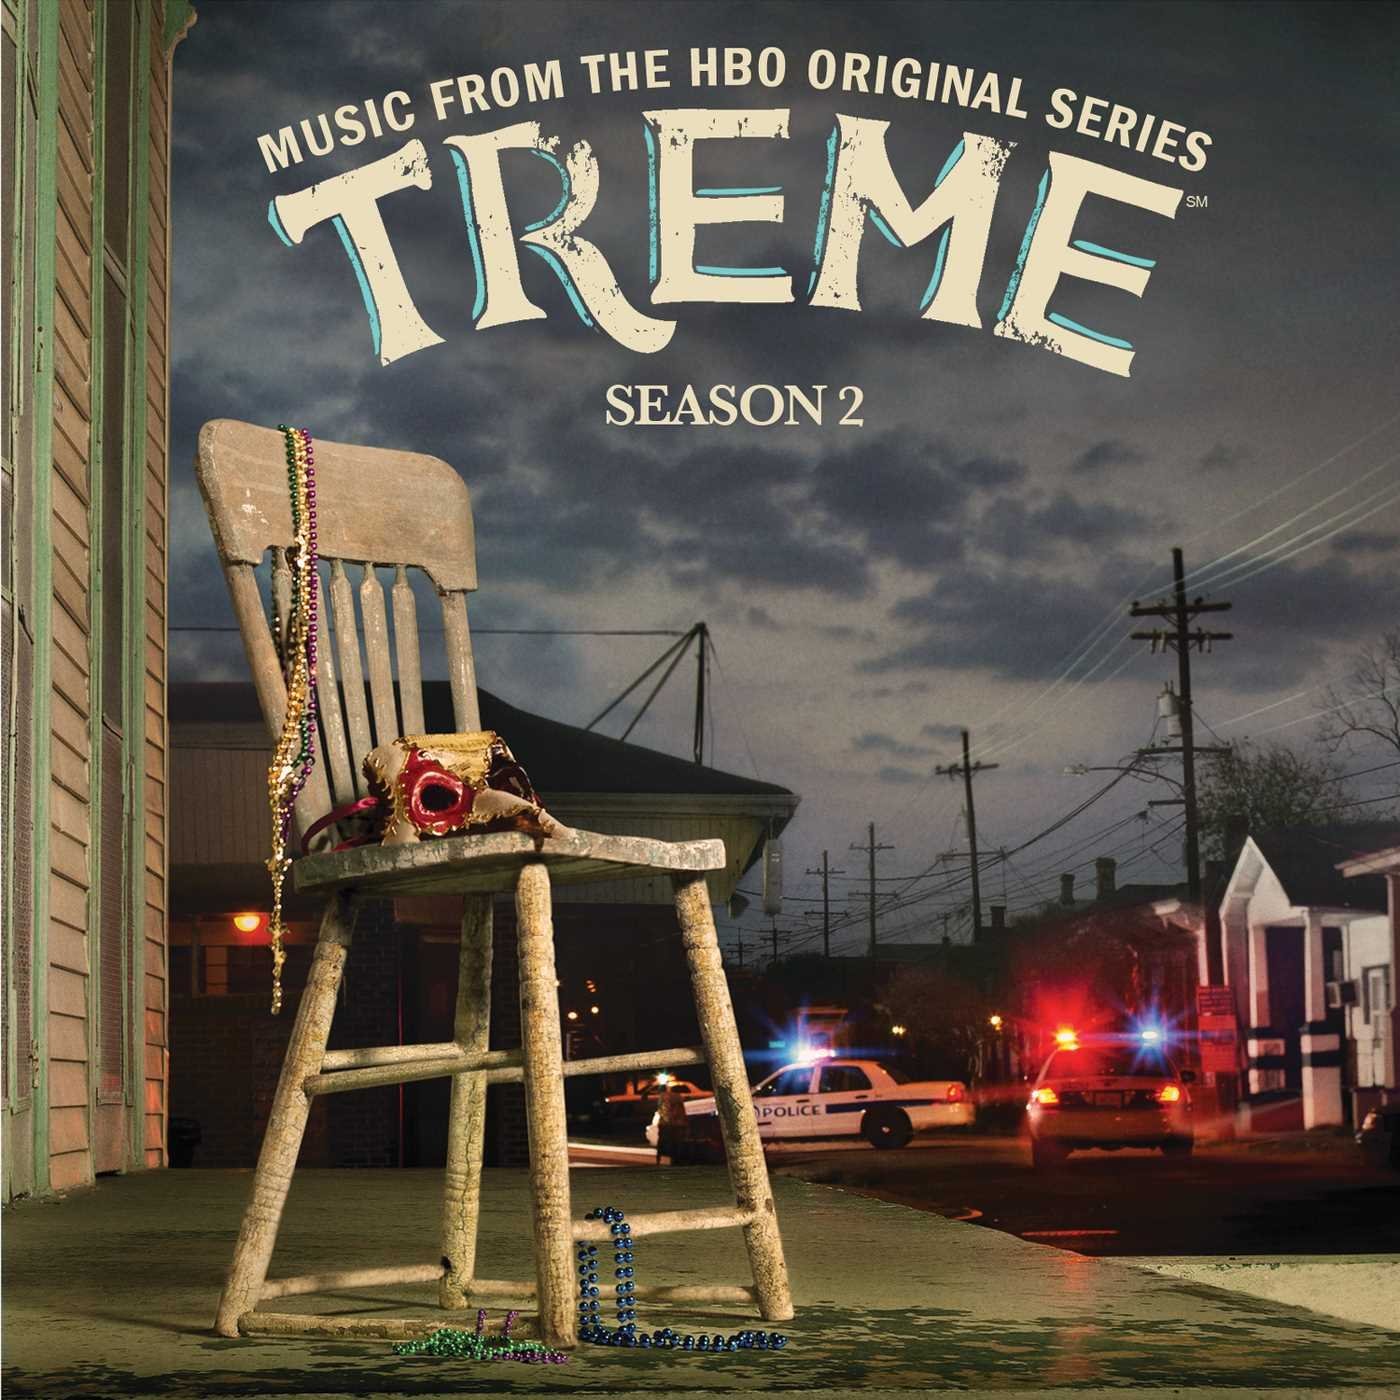 Treme, Season 2: Music From the HBO Original Series